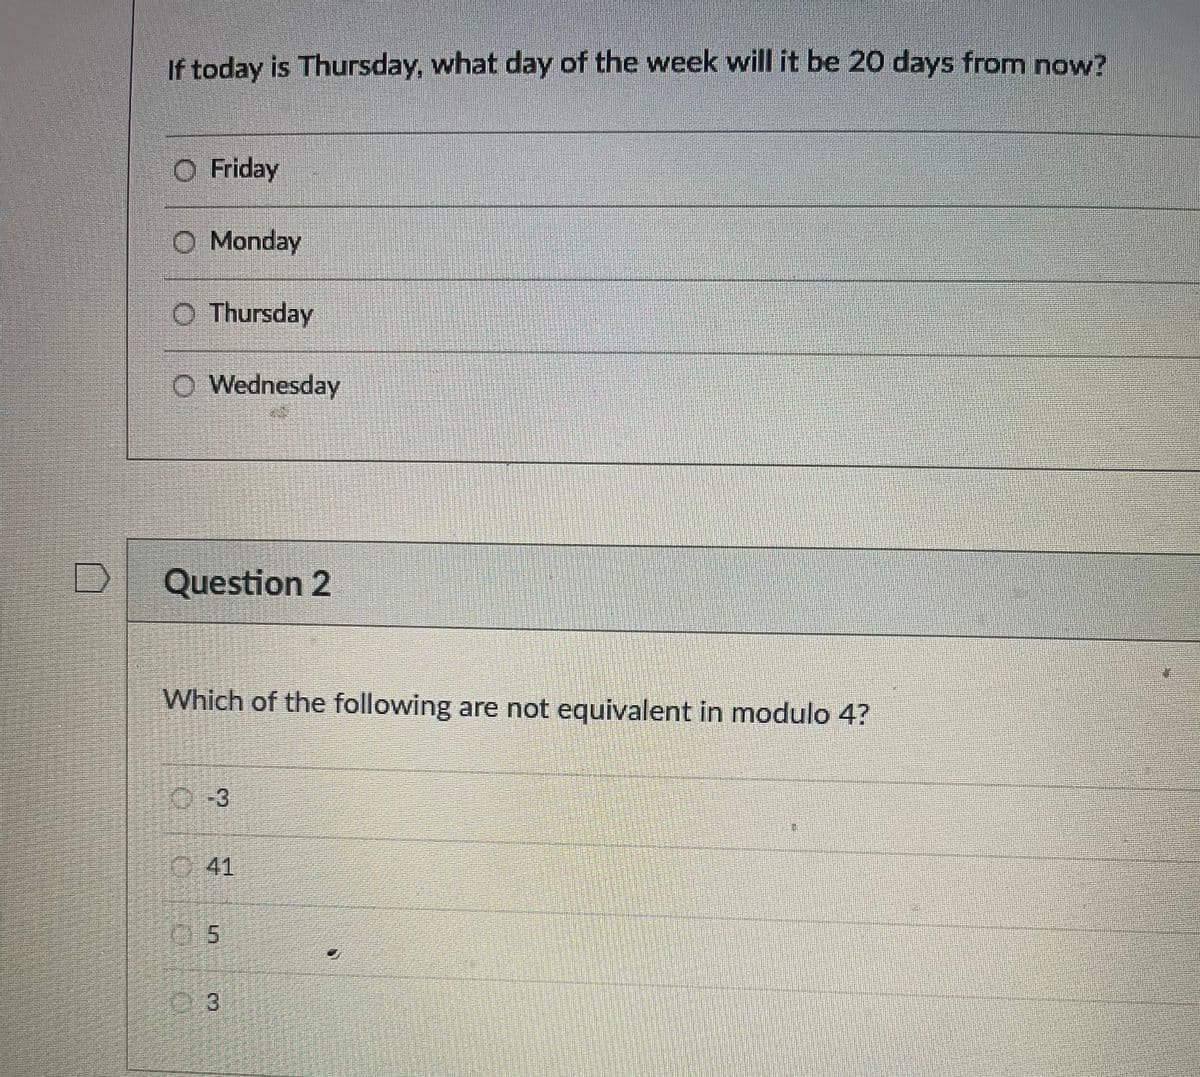 If today is Thursday, what day of the week will it be 20 days from now?
O Friday
O Monday
O Thursday
O Wednesday
Question 2
Which of the following are not equivalent in modulo 4?
